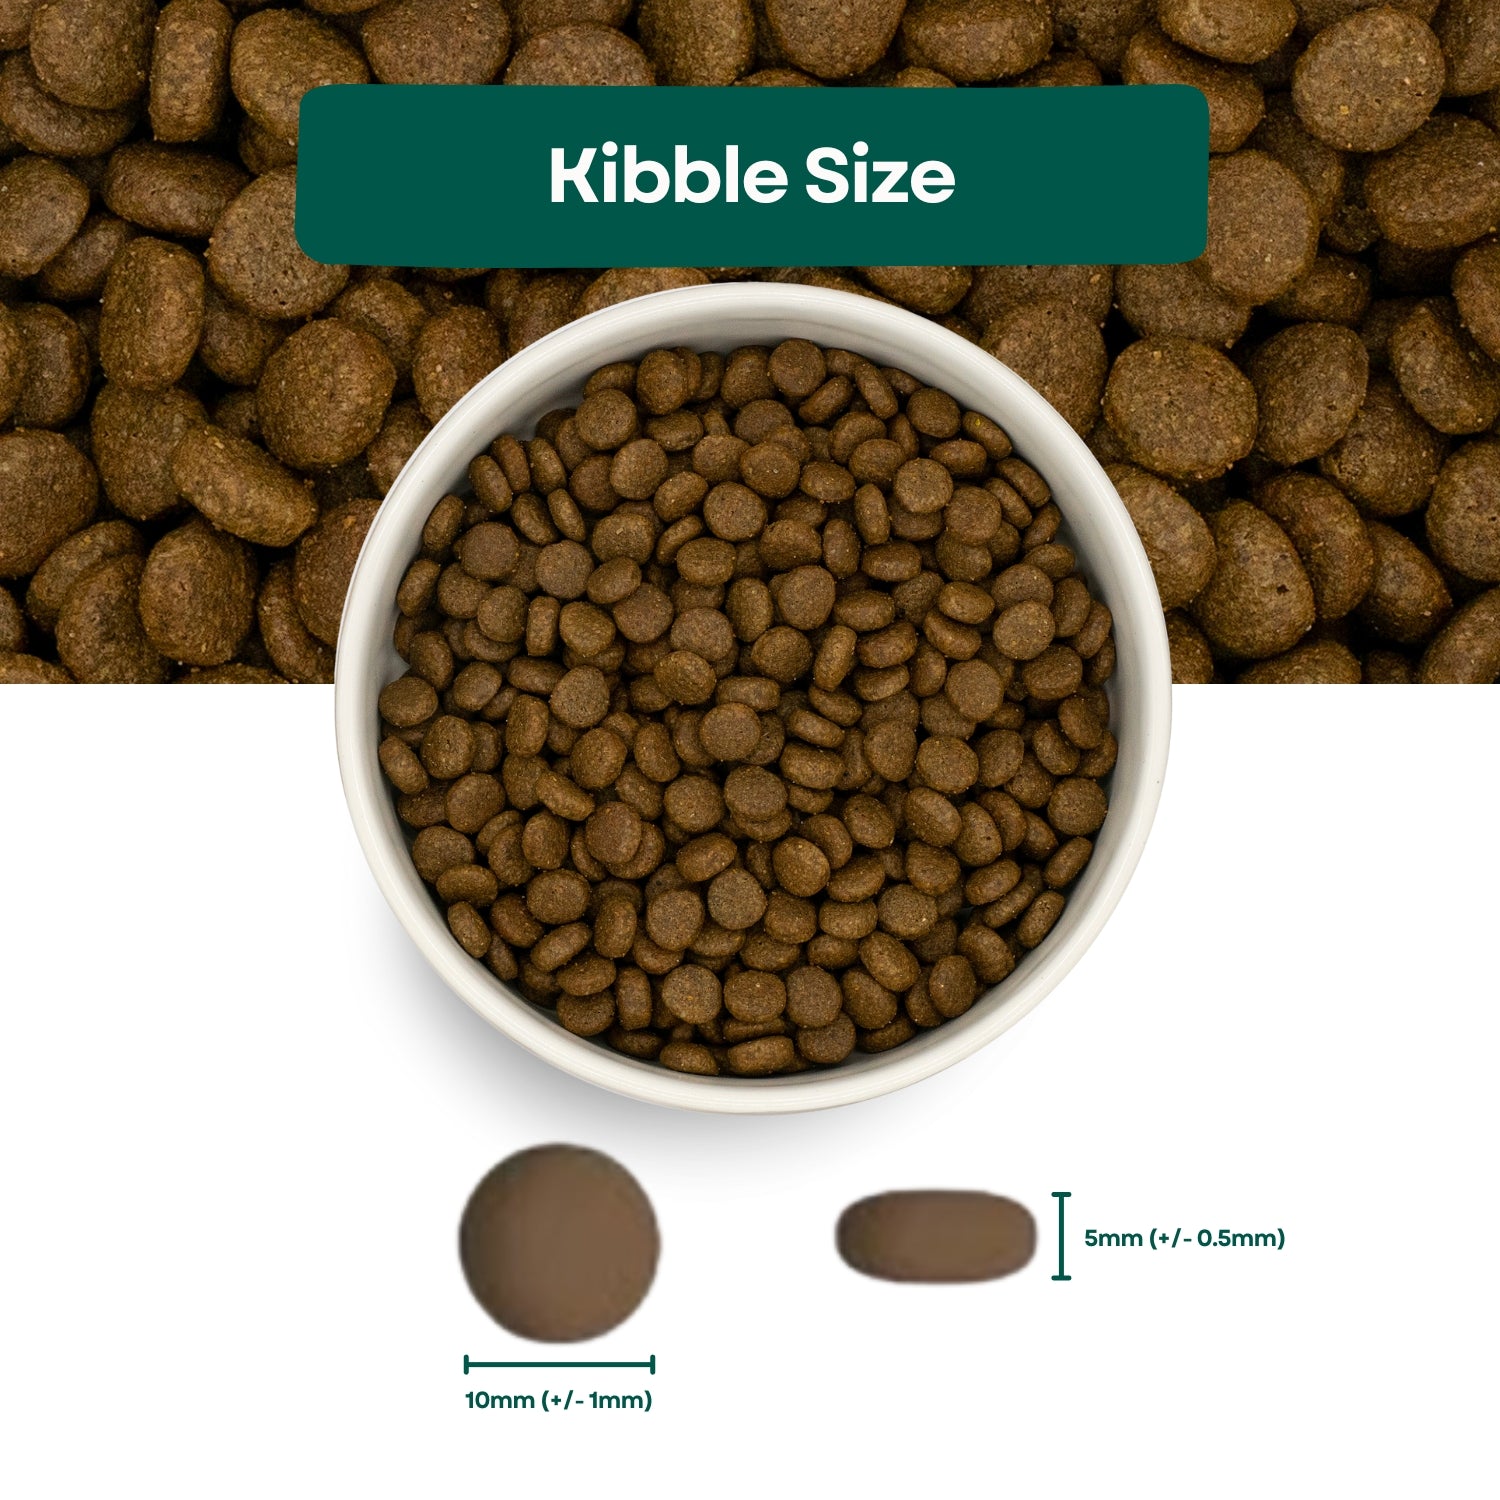 Kibble Size Connoisseur Grain Free Sterilised Adult Cat Food - White Fish with Herring Caviar